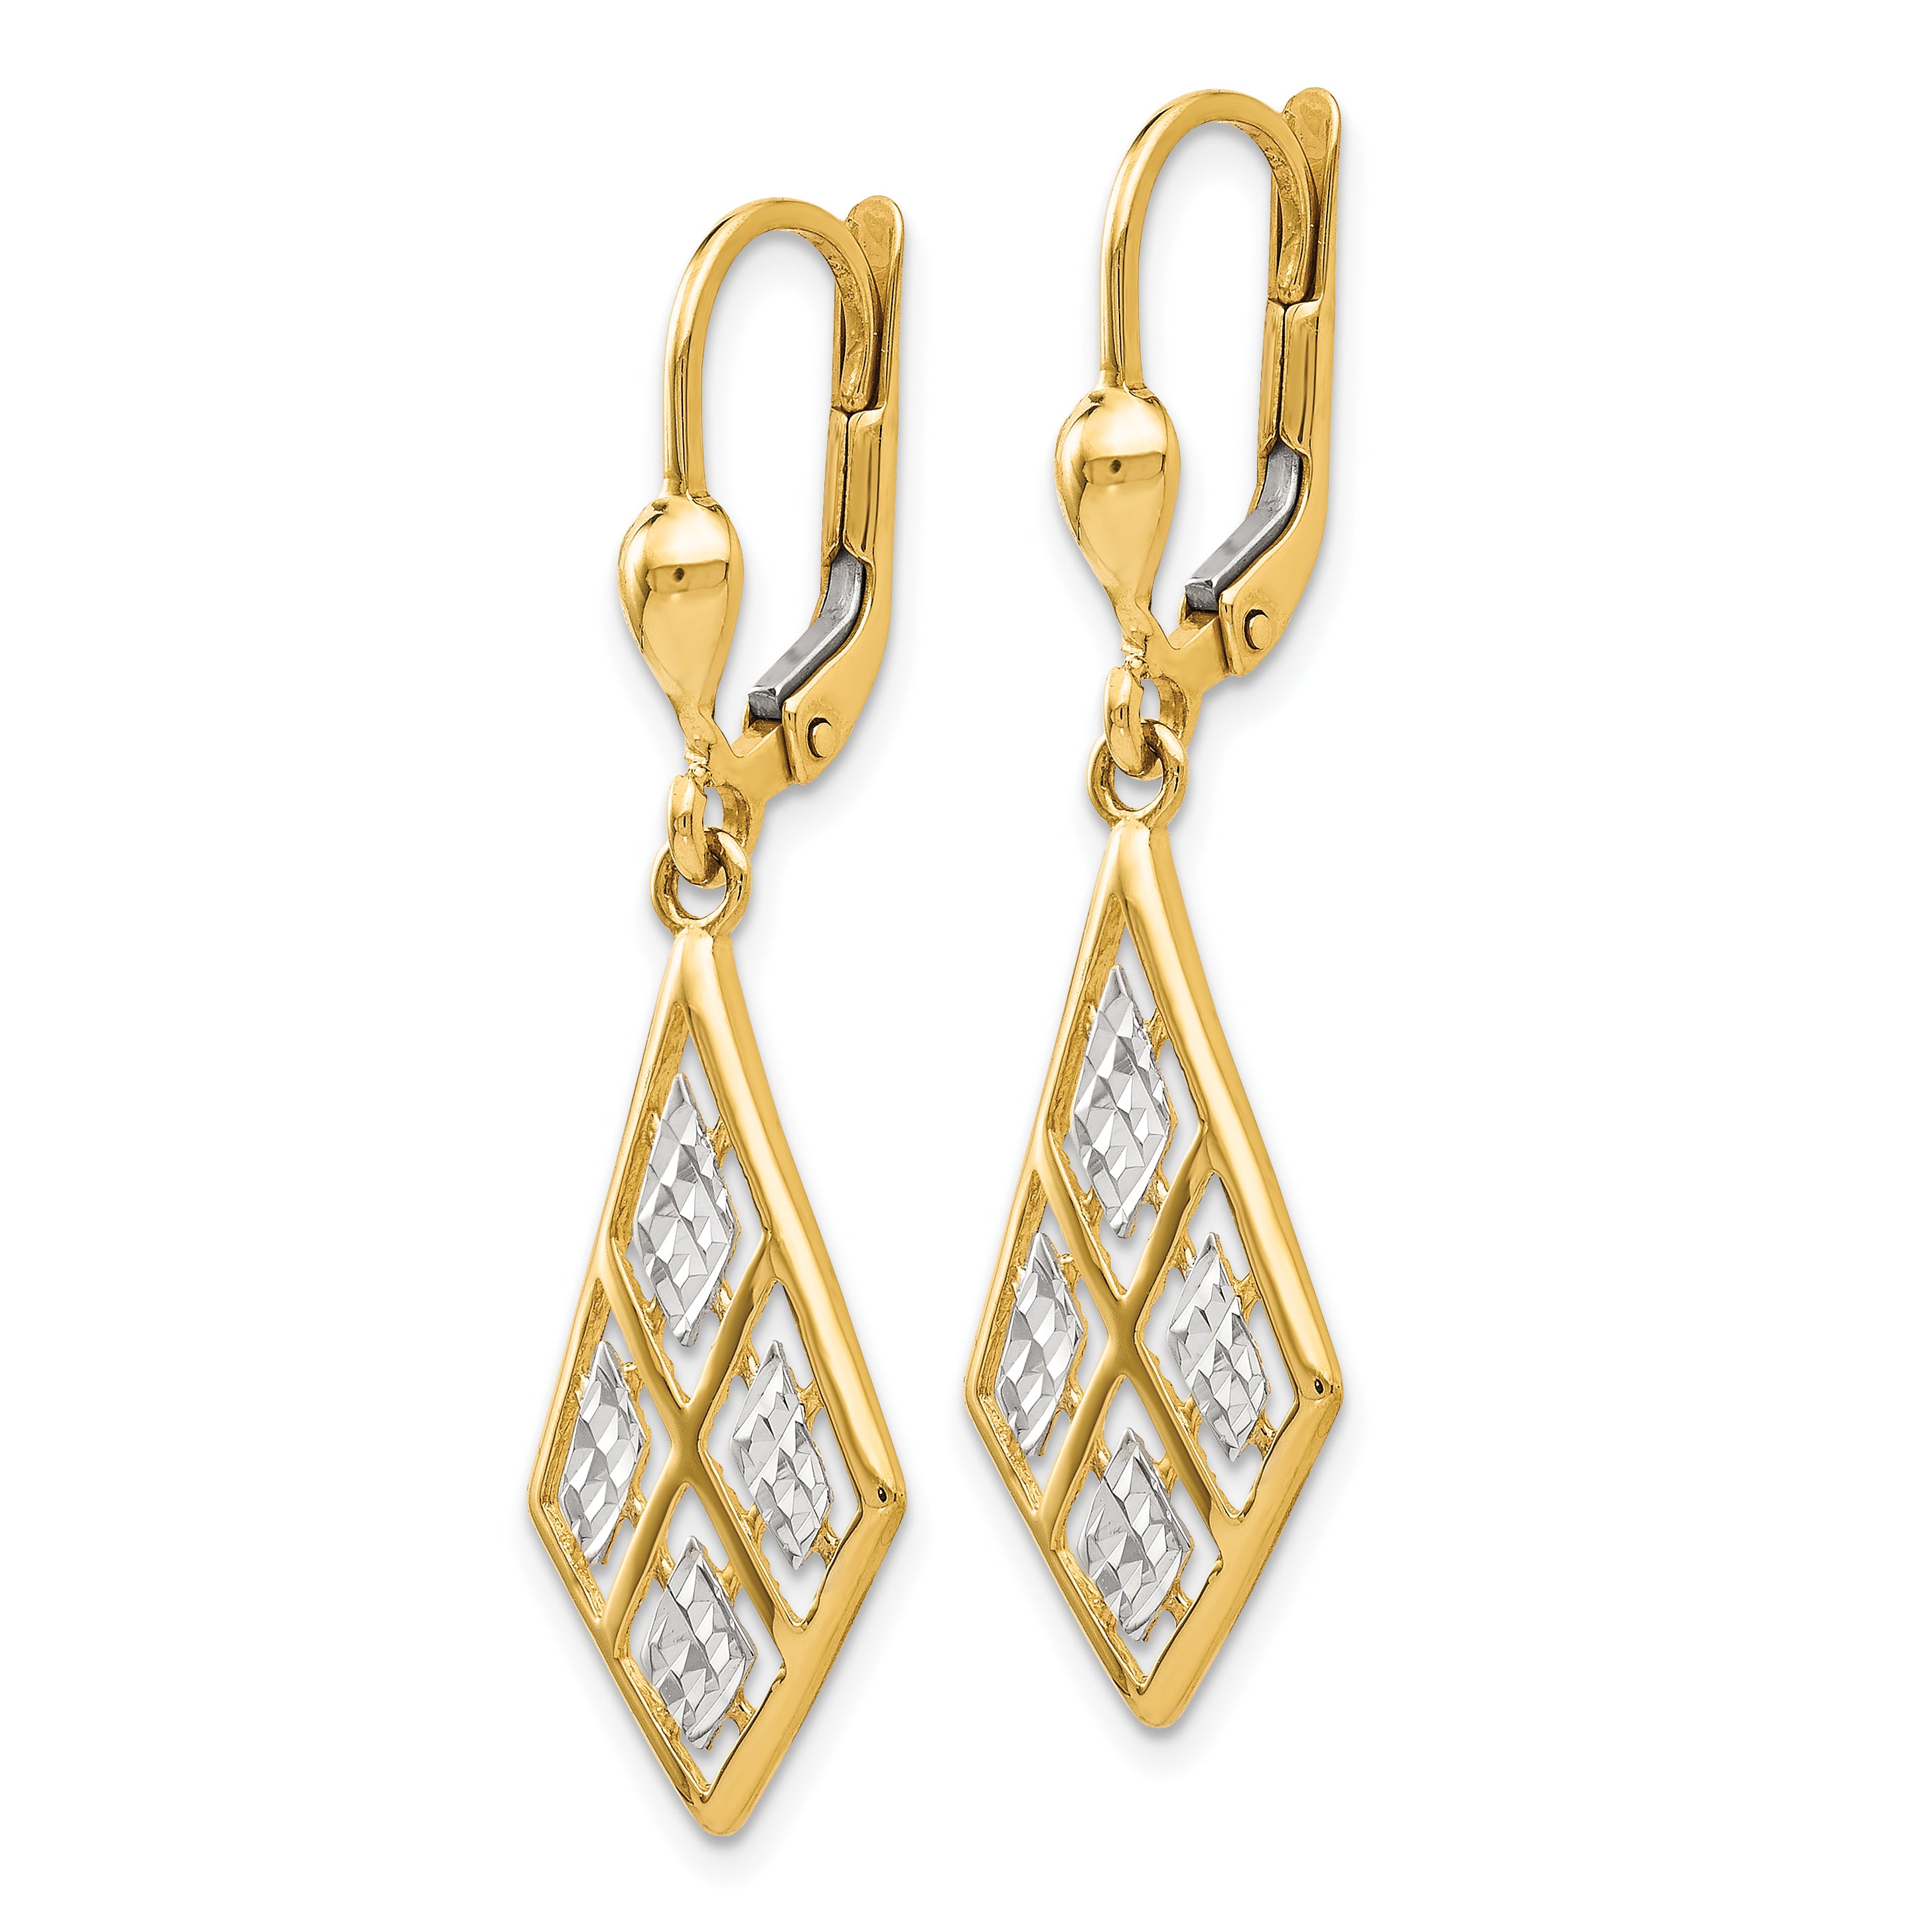 14K with Rhodium D/C Leverback Earrings